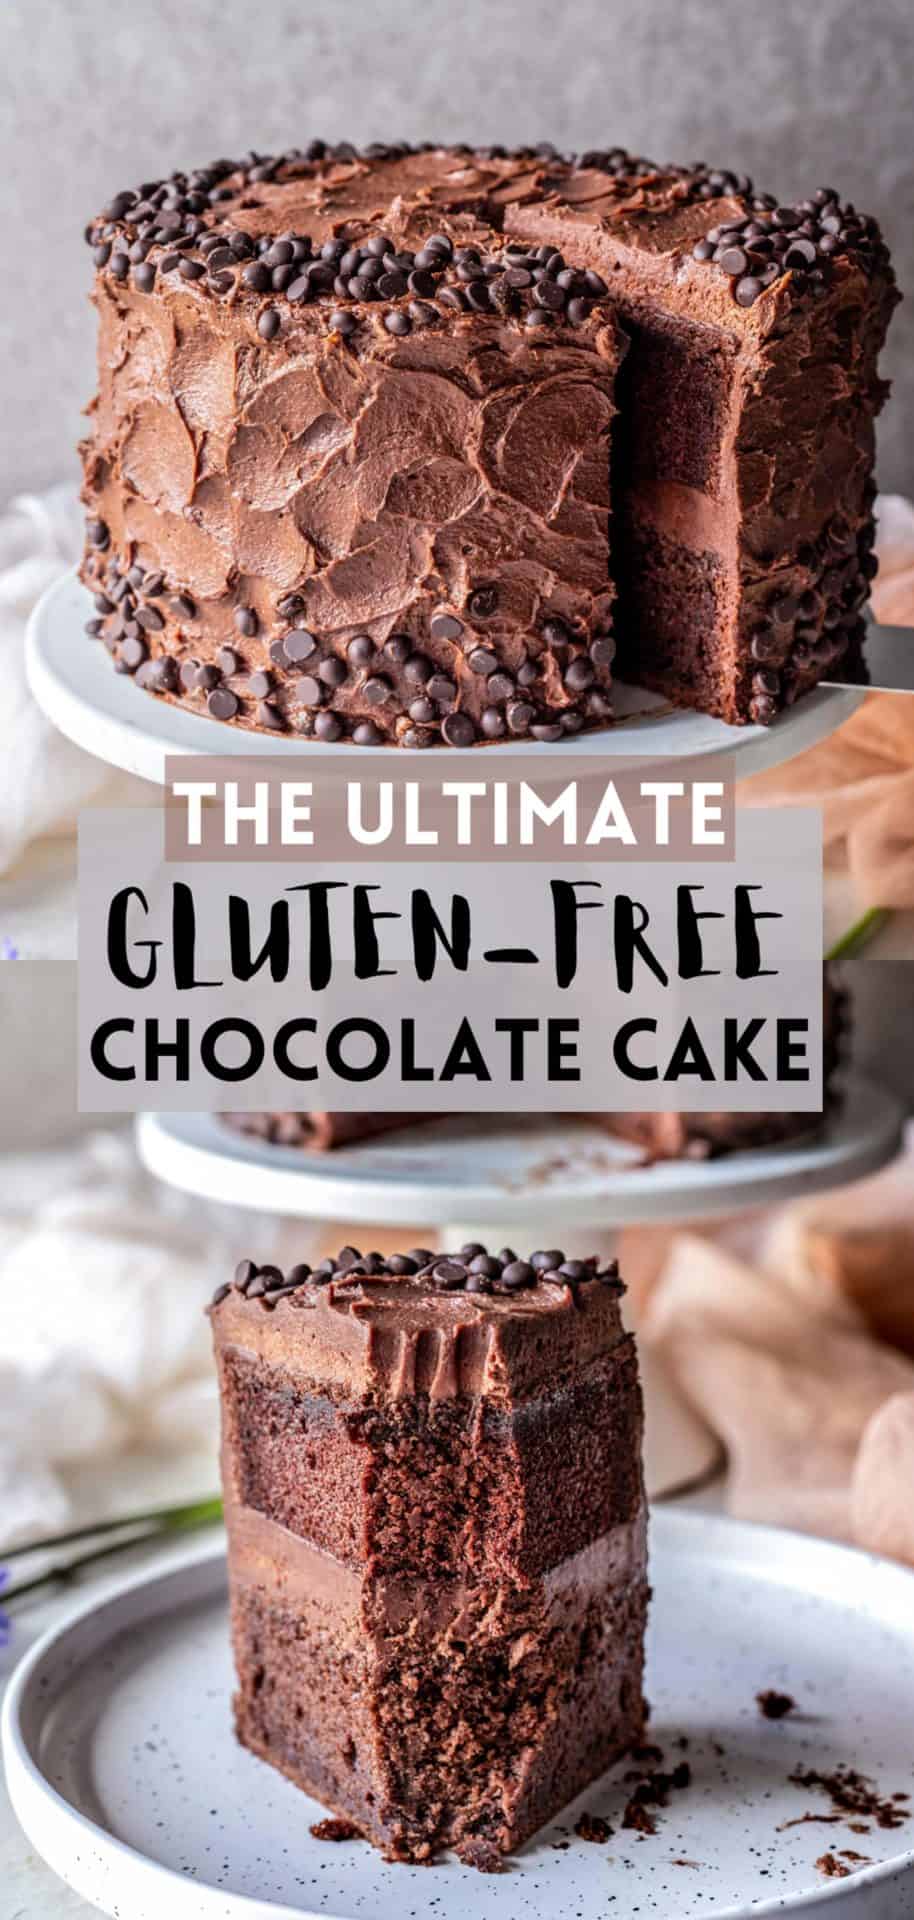 This is the ultimate gluten-free chocolate cake. It is rich, chocolaty, flavorful, perfectly sweetened and just a dream come true for all the chocoholics out there.